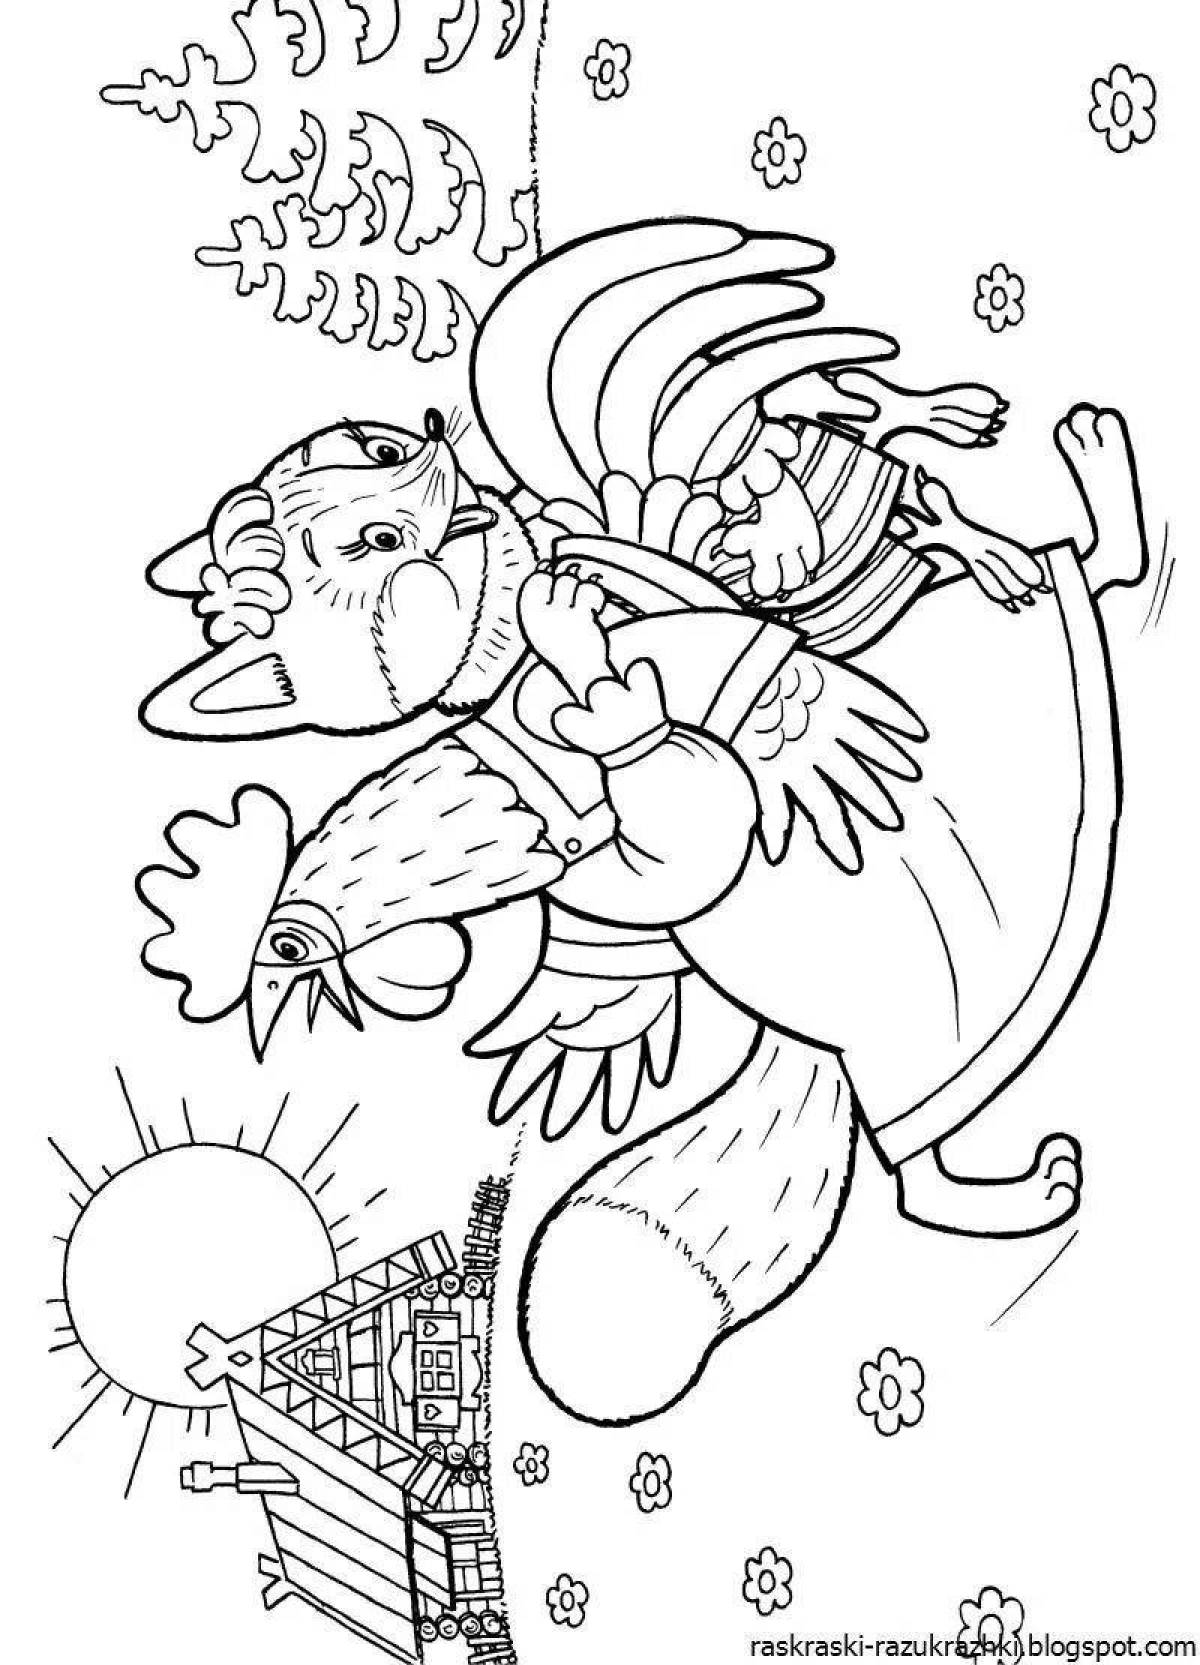 Legendary coloring book heroes of Russian fairy tales